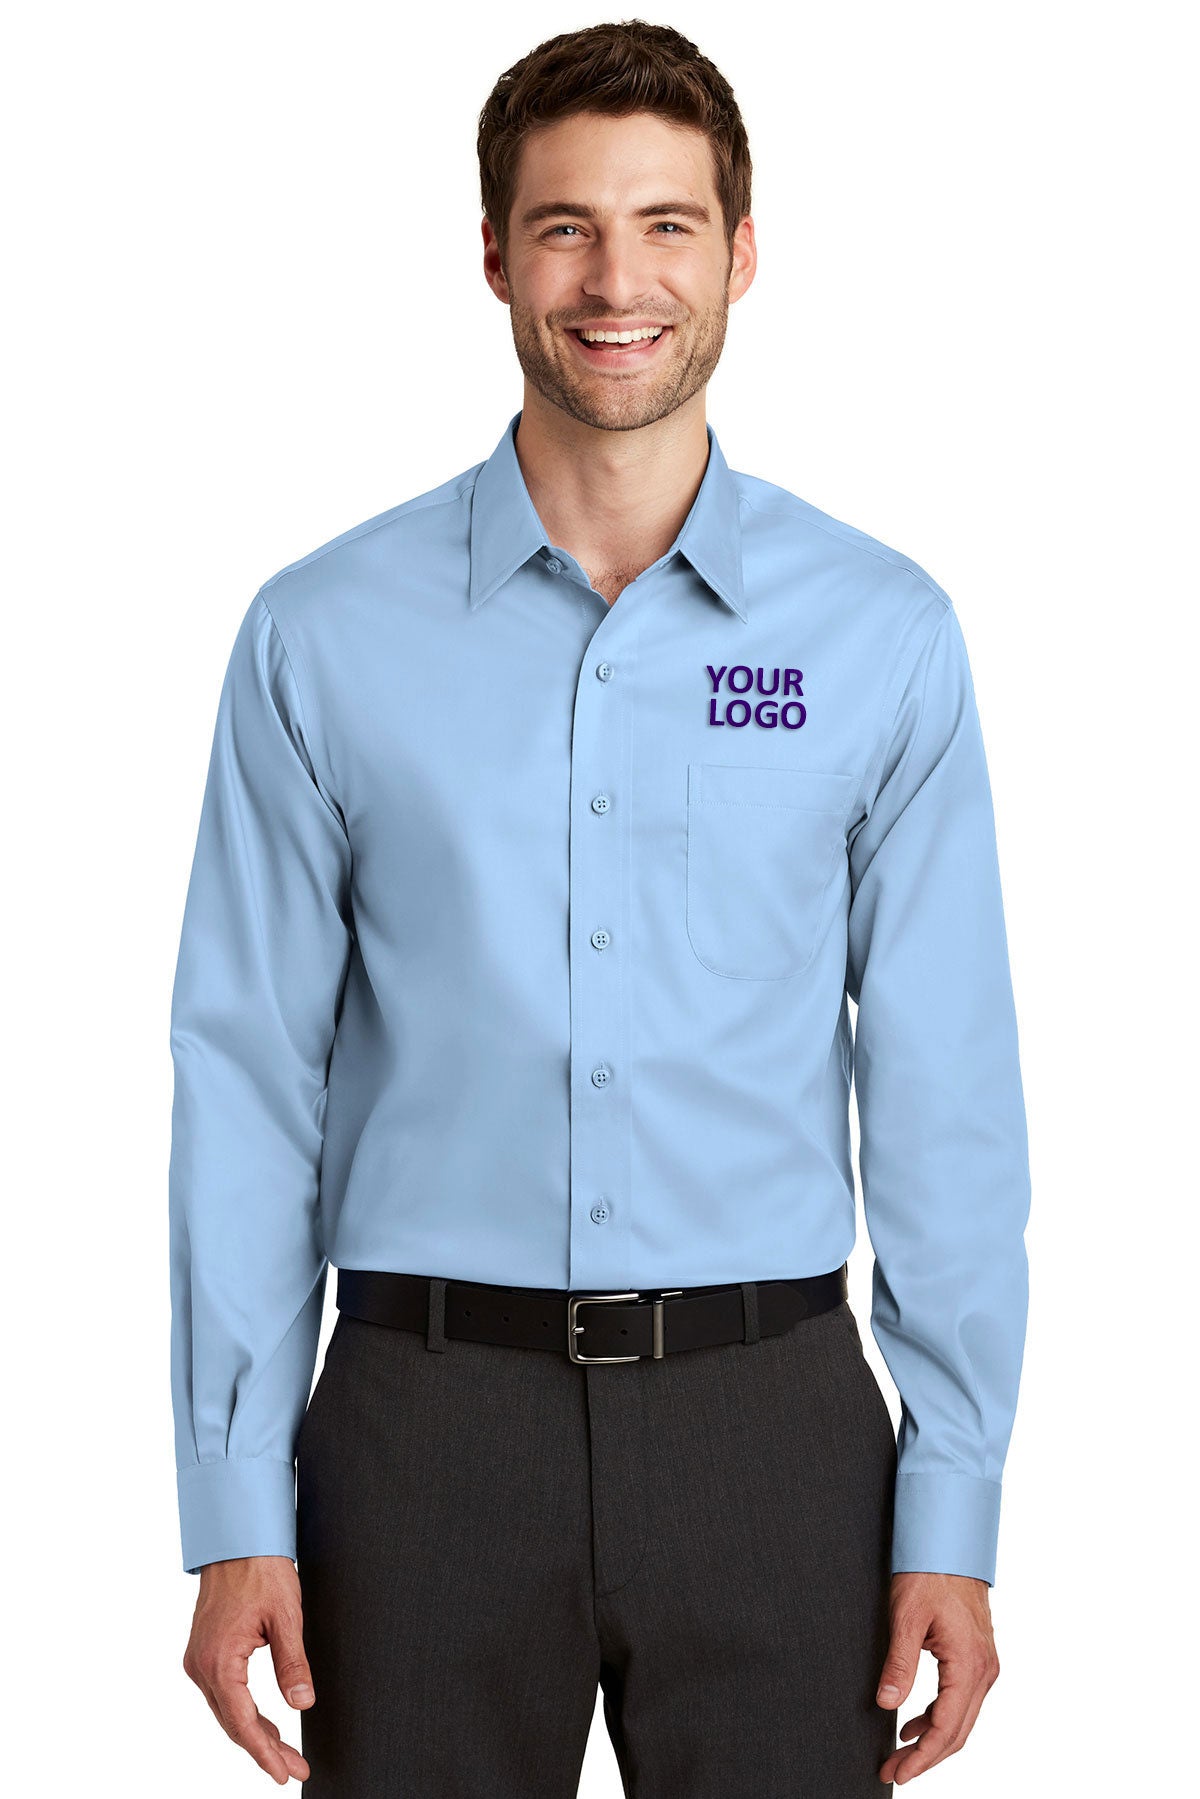 Port Authority Sky Blue S638 embroidered work shirts